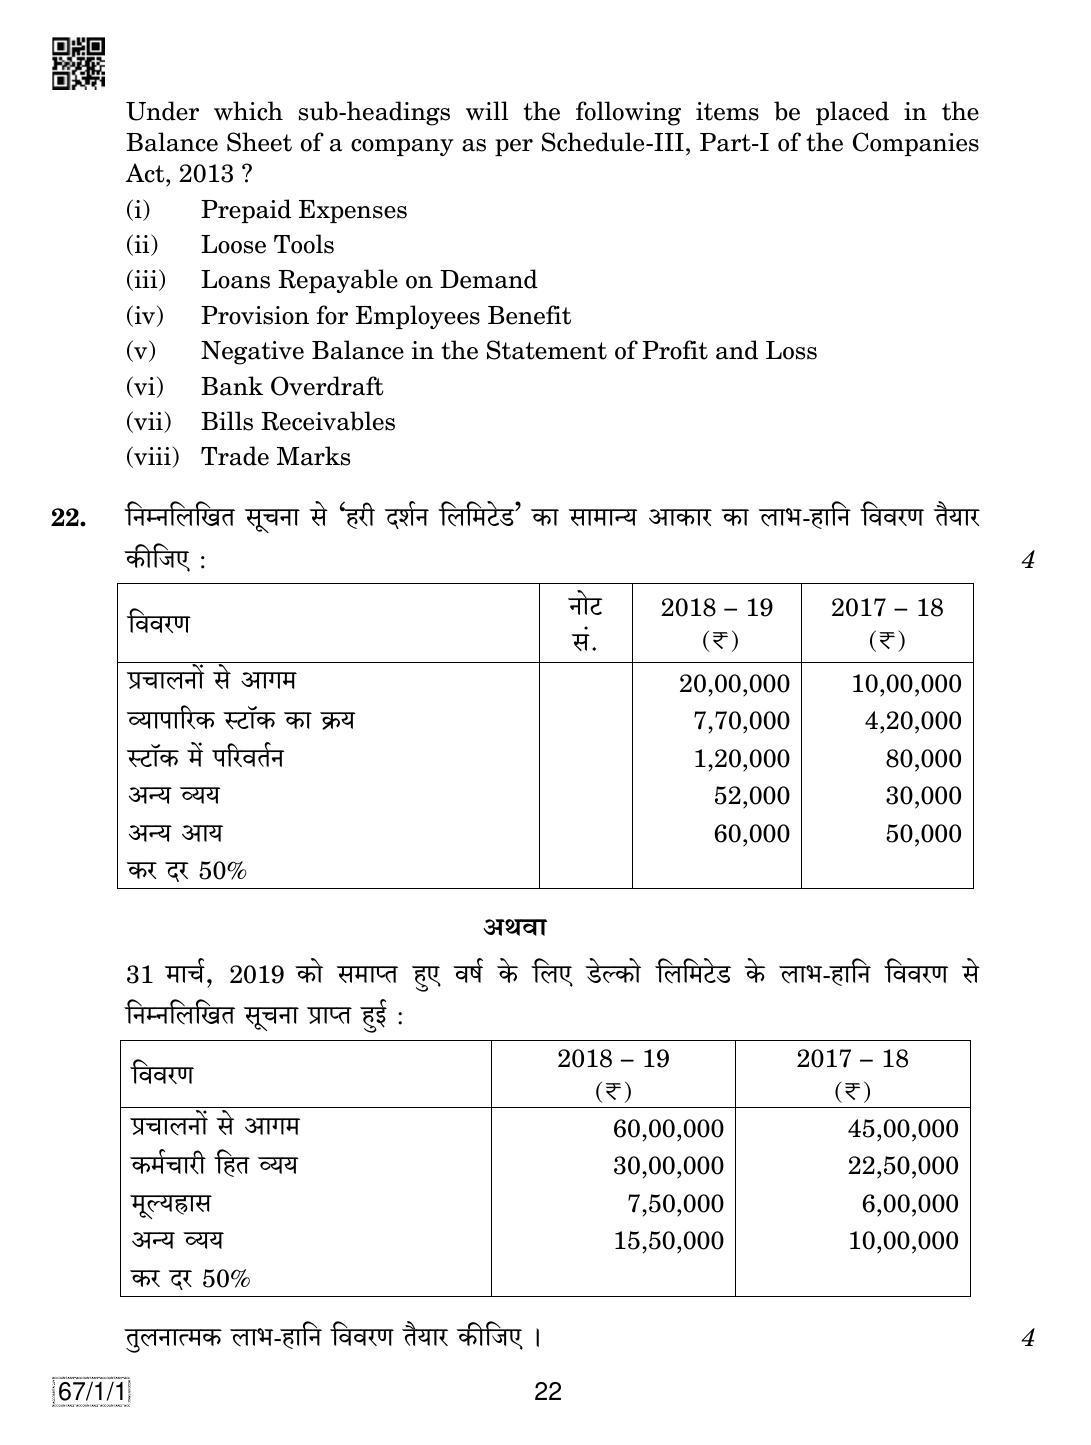 CBSE Class 12 67-1-1 ACCOUNTANCY 2019 Compartment Question Paper - Page 22